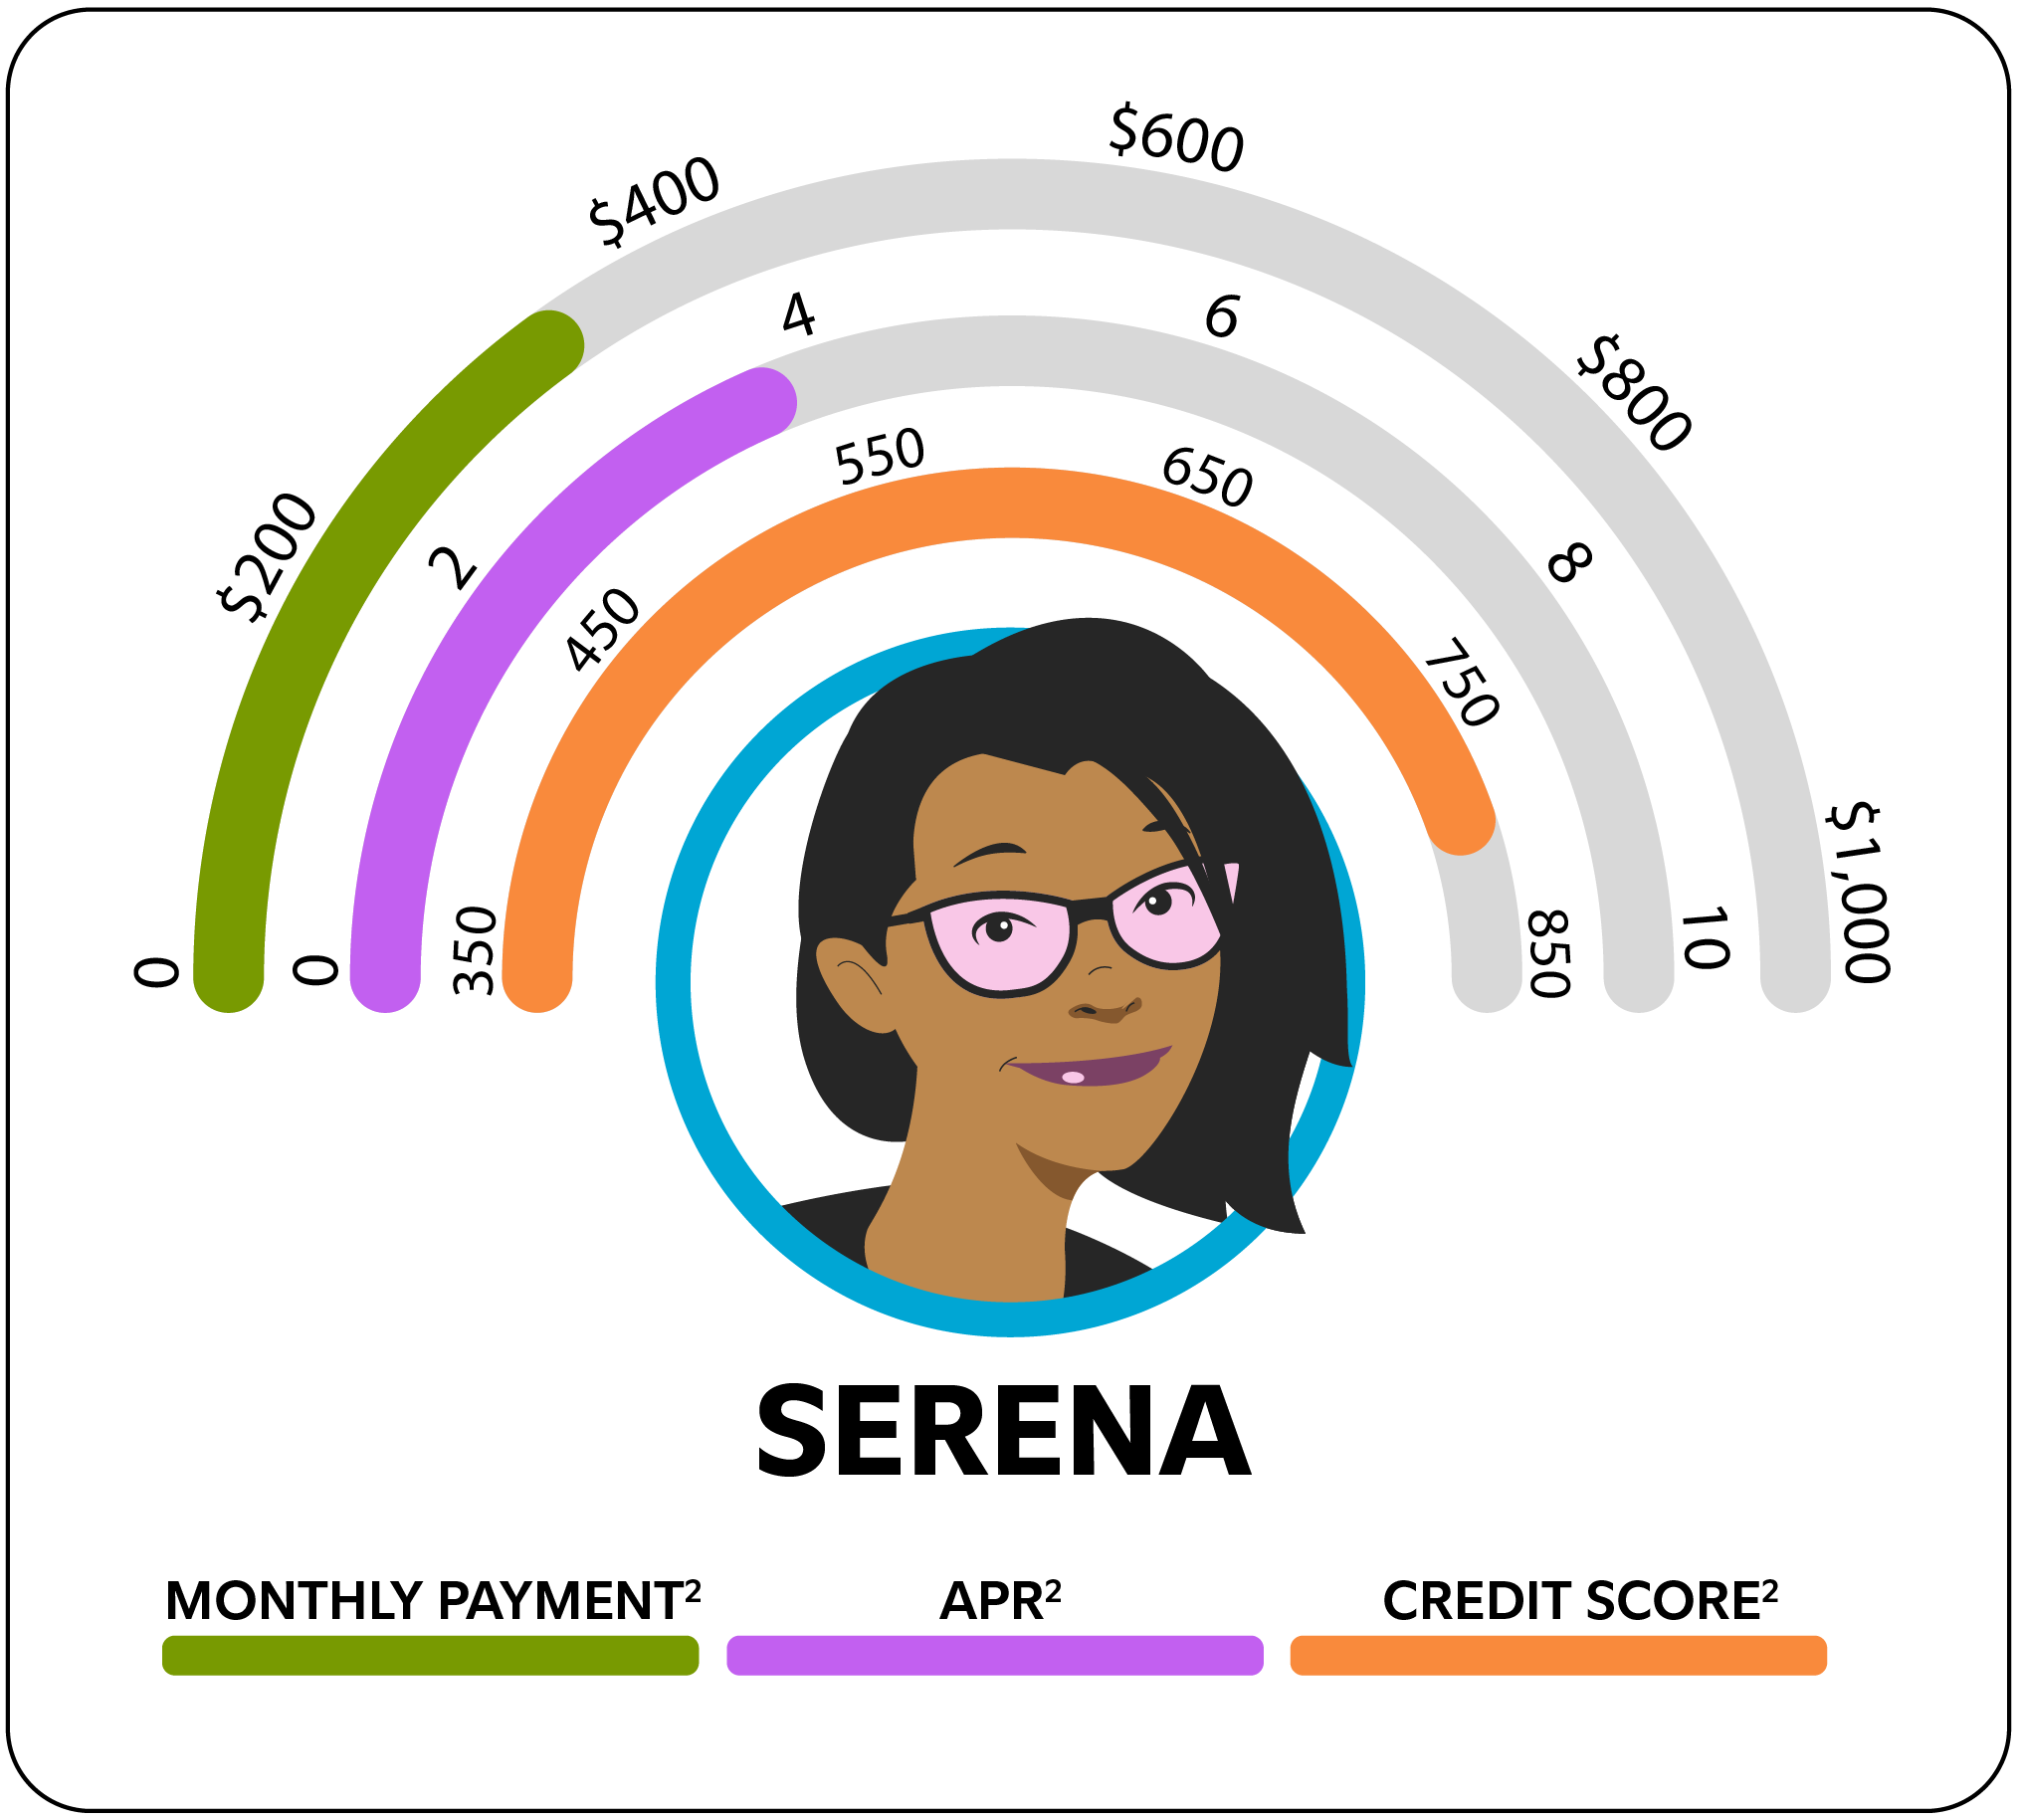 What a monthly payment and APR might look like with a higher credit score